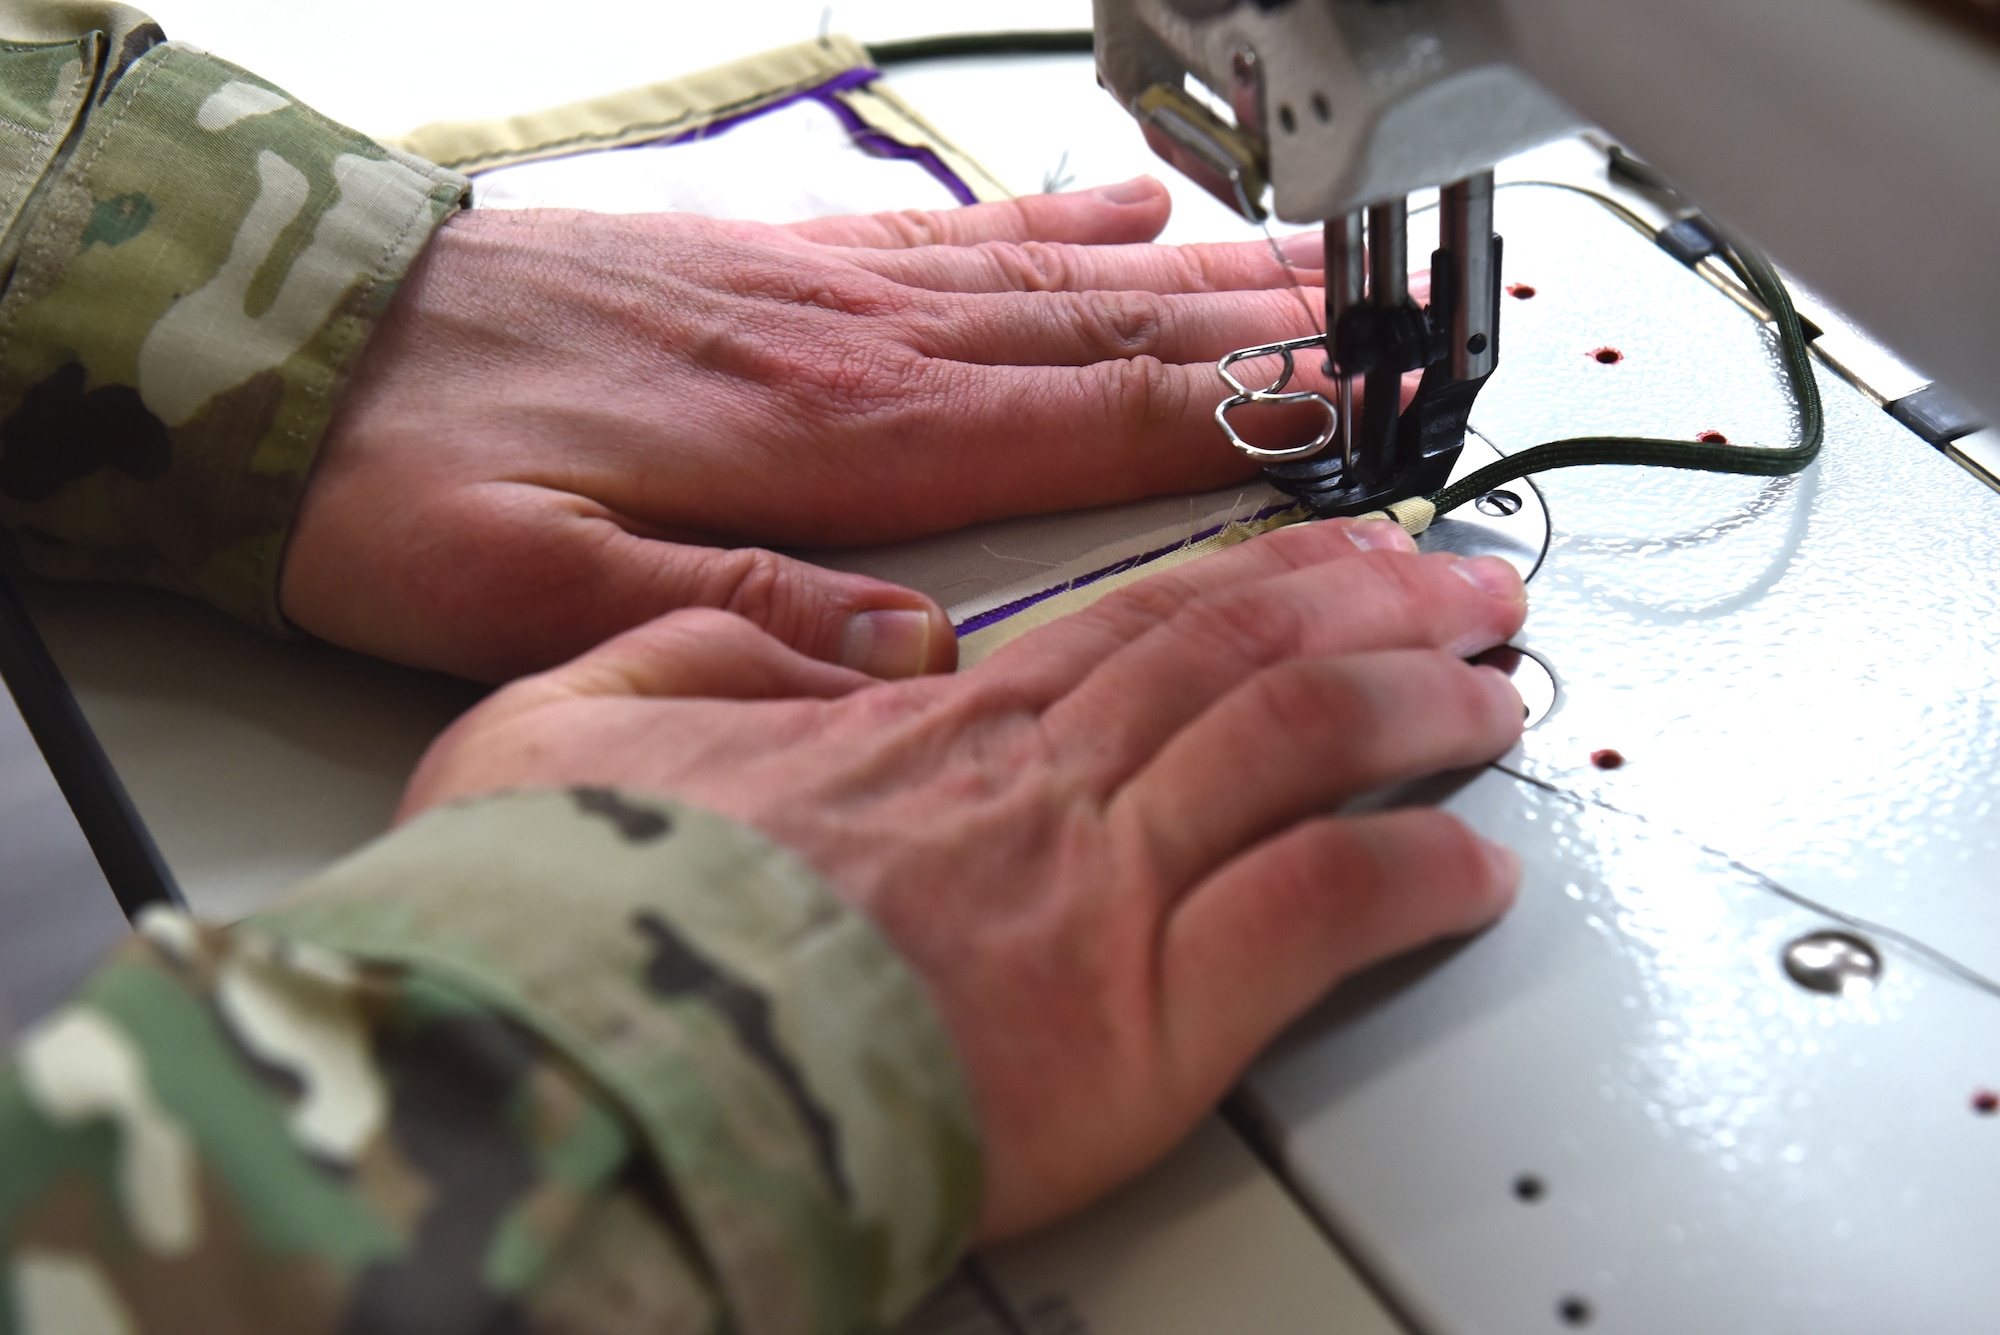 U.S. Air Force Master Sgt. Shawn Freed, 92nd Operation Support Squadron Aircrew Flight Equipment superintendent, uses a sewing machine to create protective facemasks for Airmen to wear at Fairchild Air Force Base, Washington, April 10, 2020. AFE was able to produce 250 masks within the first two days of receiving the task, and have produced over 650 more for Airmen on the installation to wear. (U.S. Air Force photo by Senior Airman Lawrence Sena)